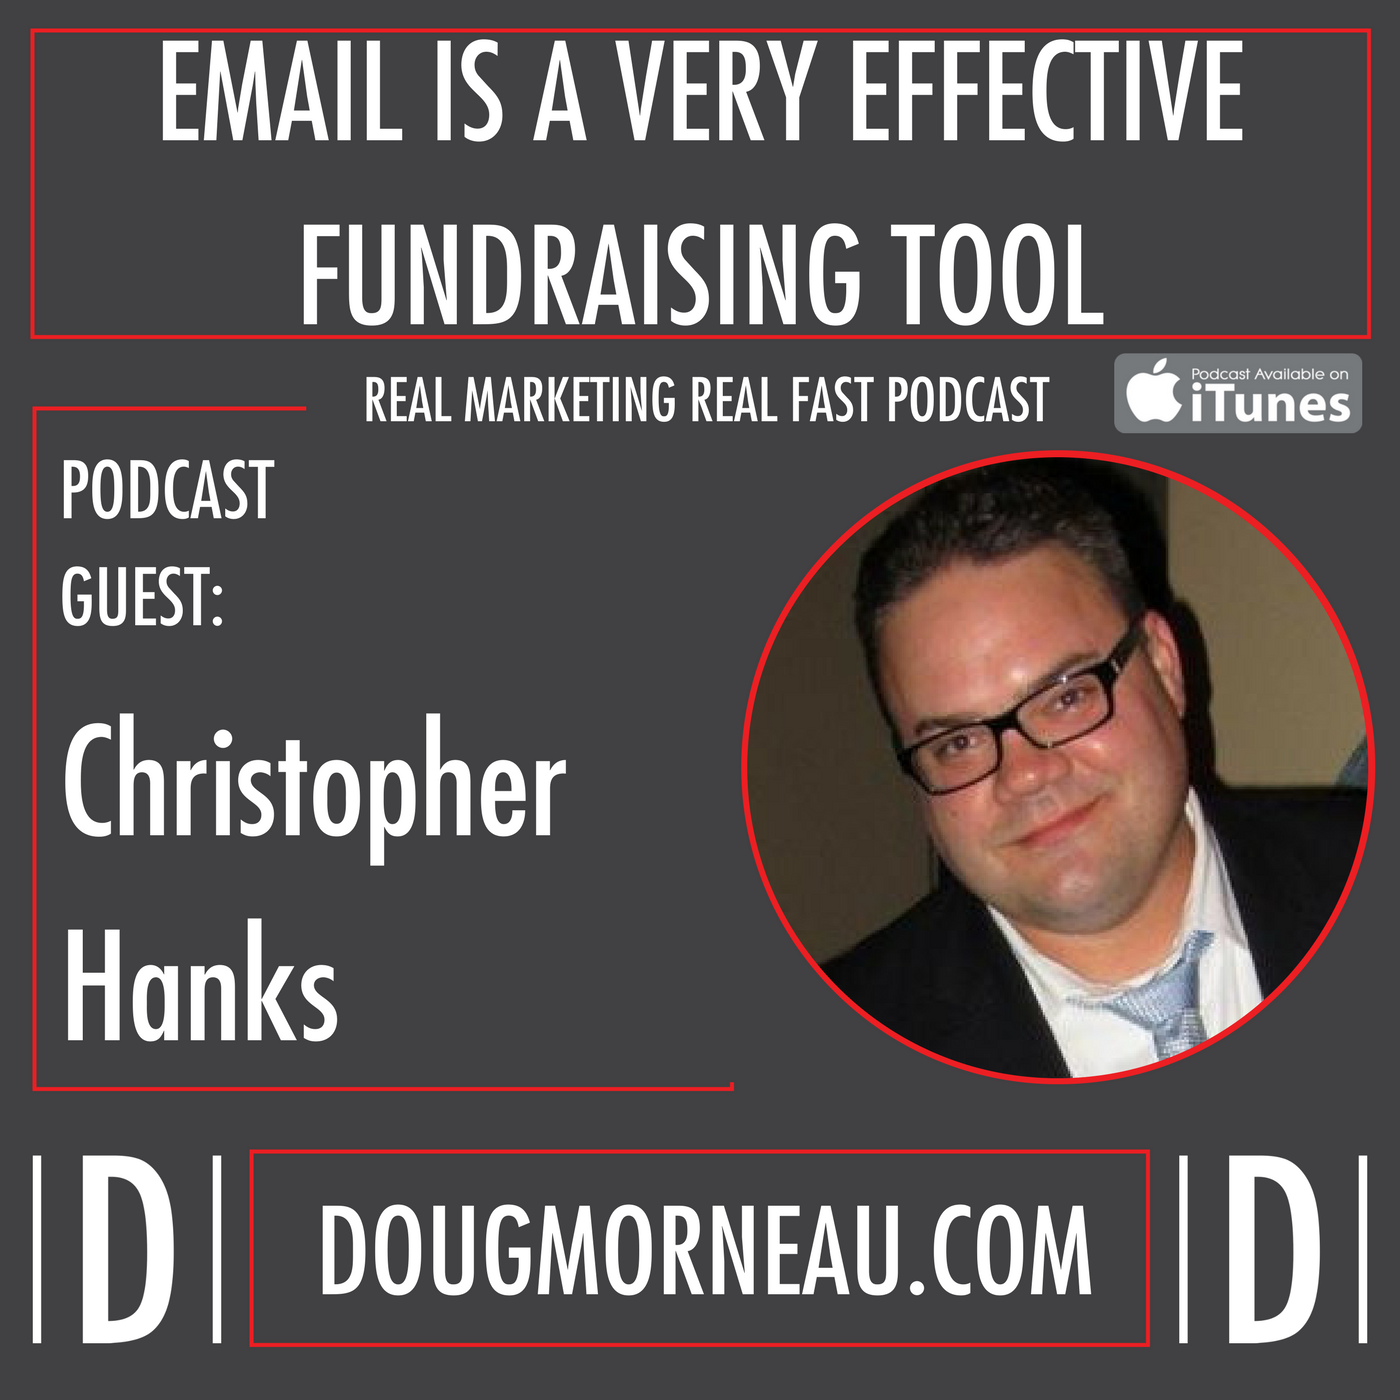 An email list is a very effective fundraising tool - DOUG MORNEAU - Christopher Hanks - REAL MARKETING REAL FAST PODCAST